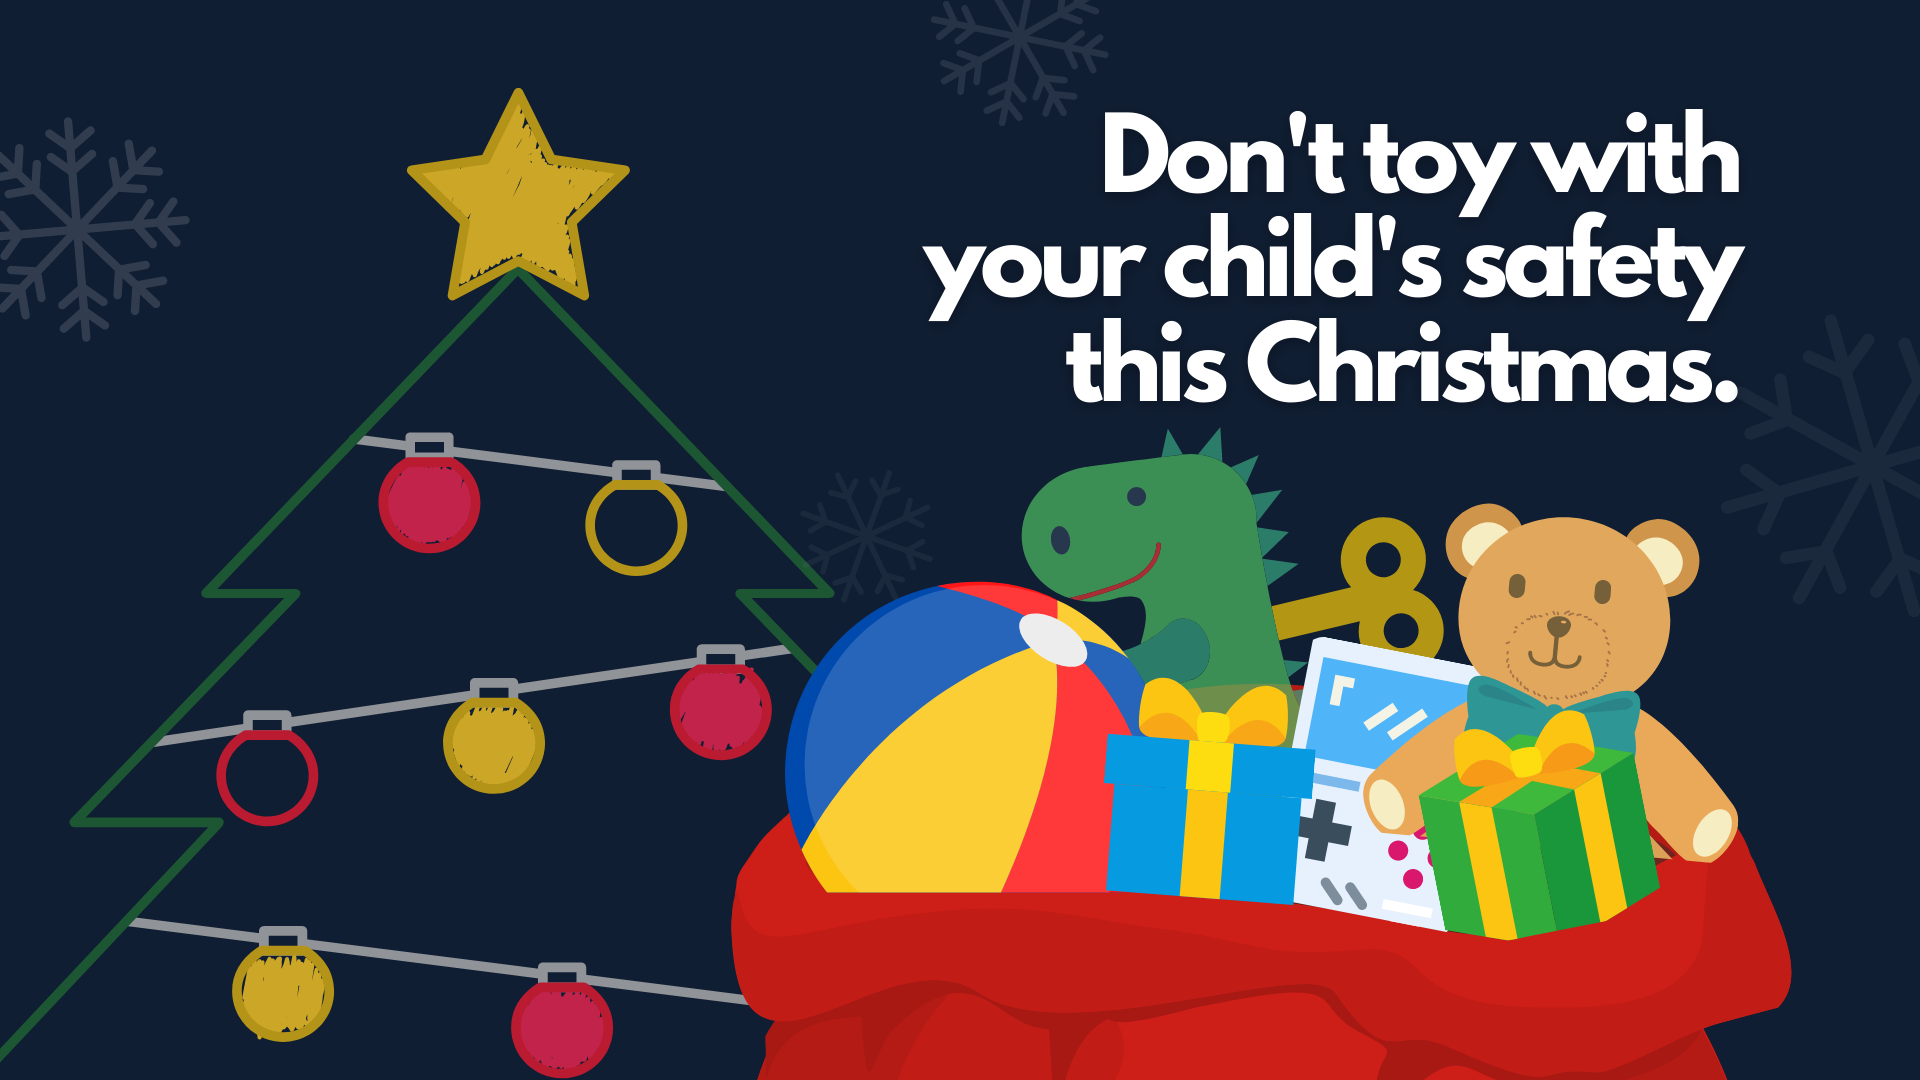 Don't toy with your child's safety this Christmas graphic